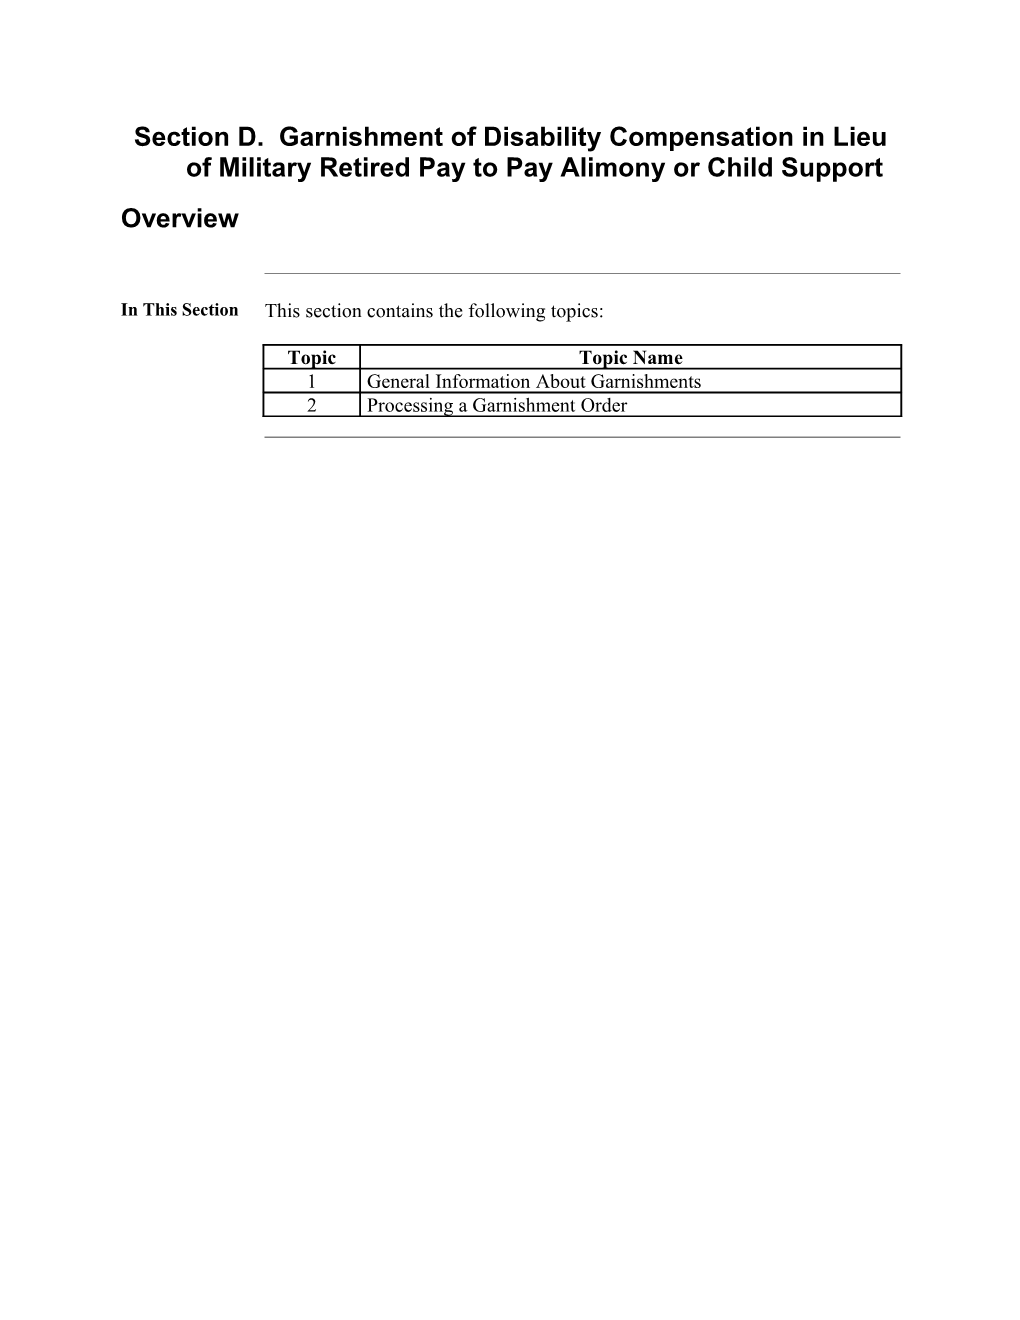 Special Issues in Apportionment Cases (U.S. Department of Veterans Affairs)